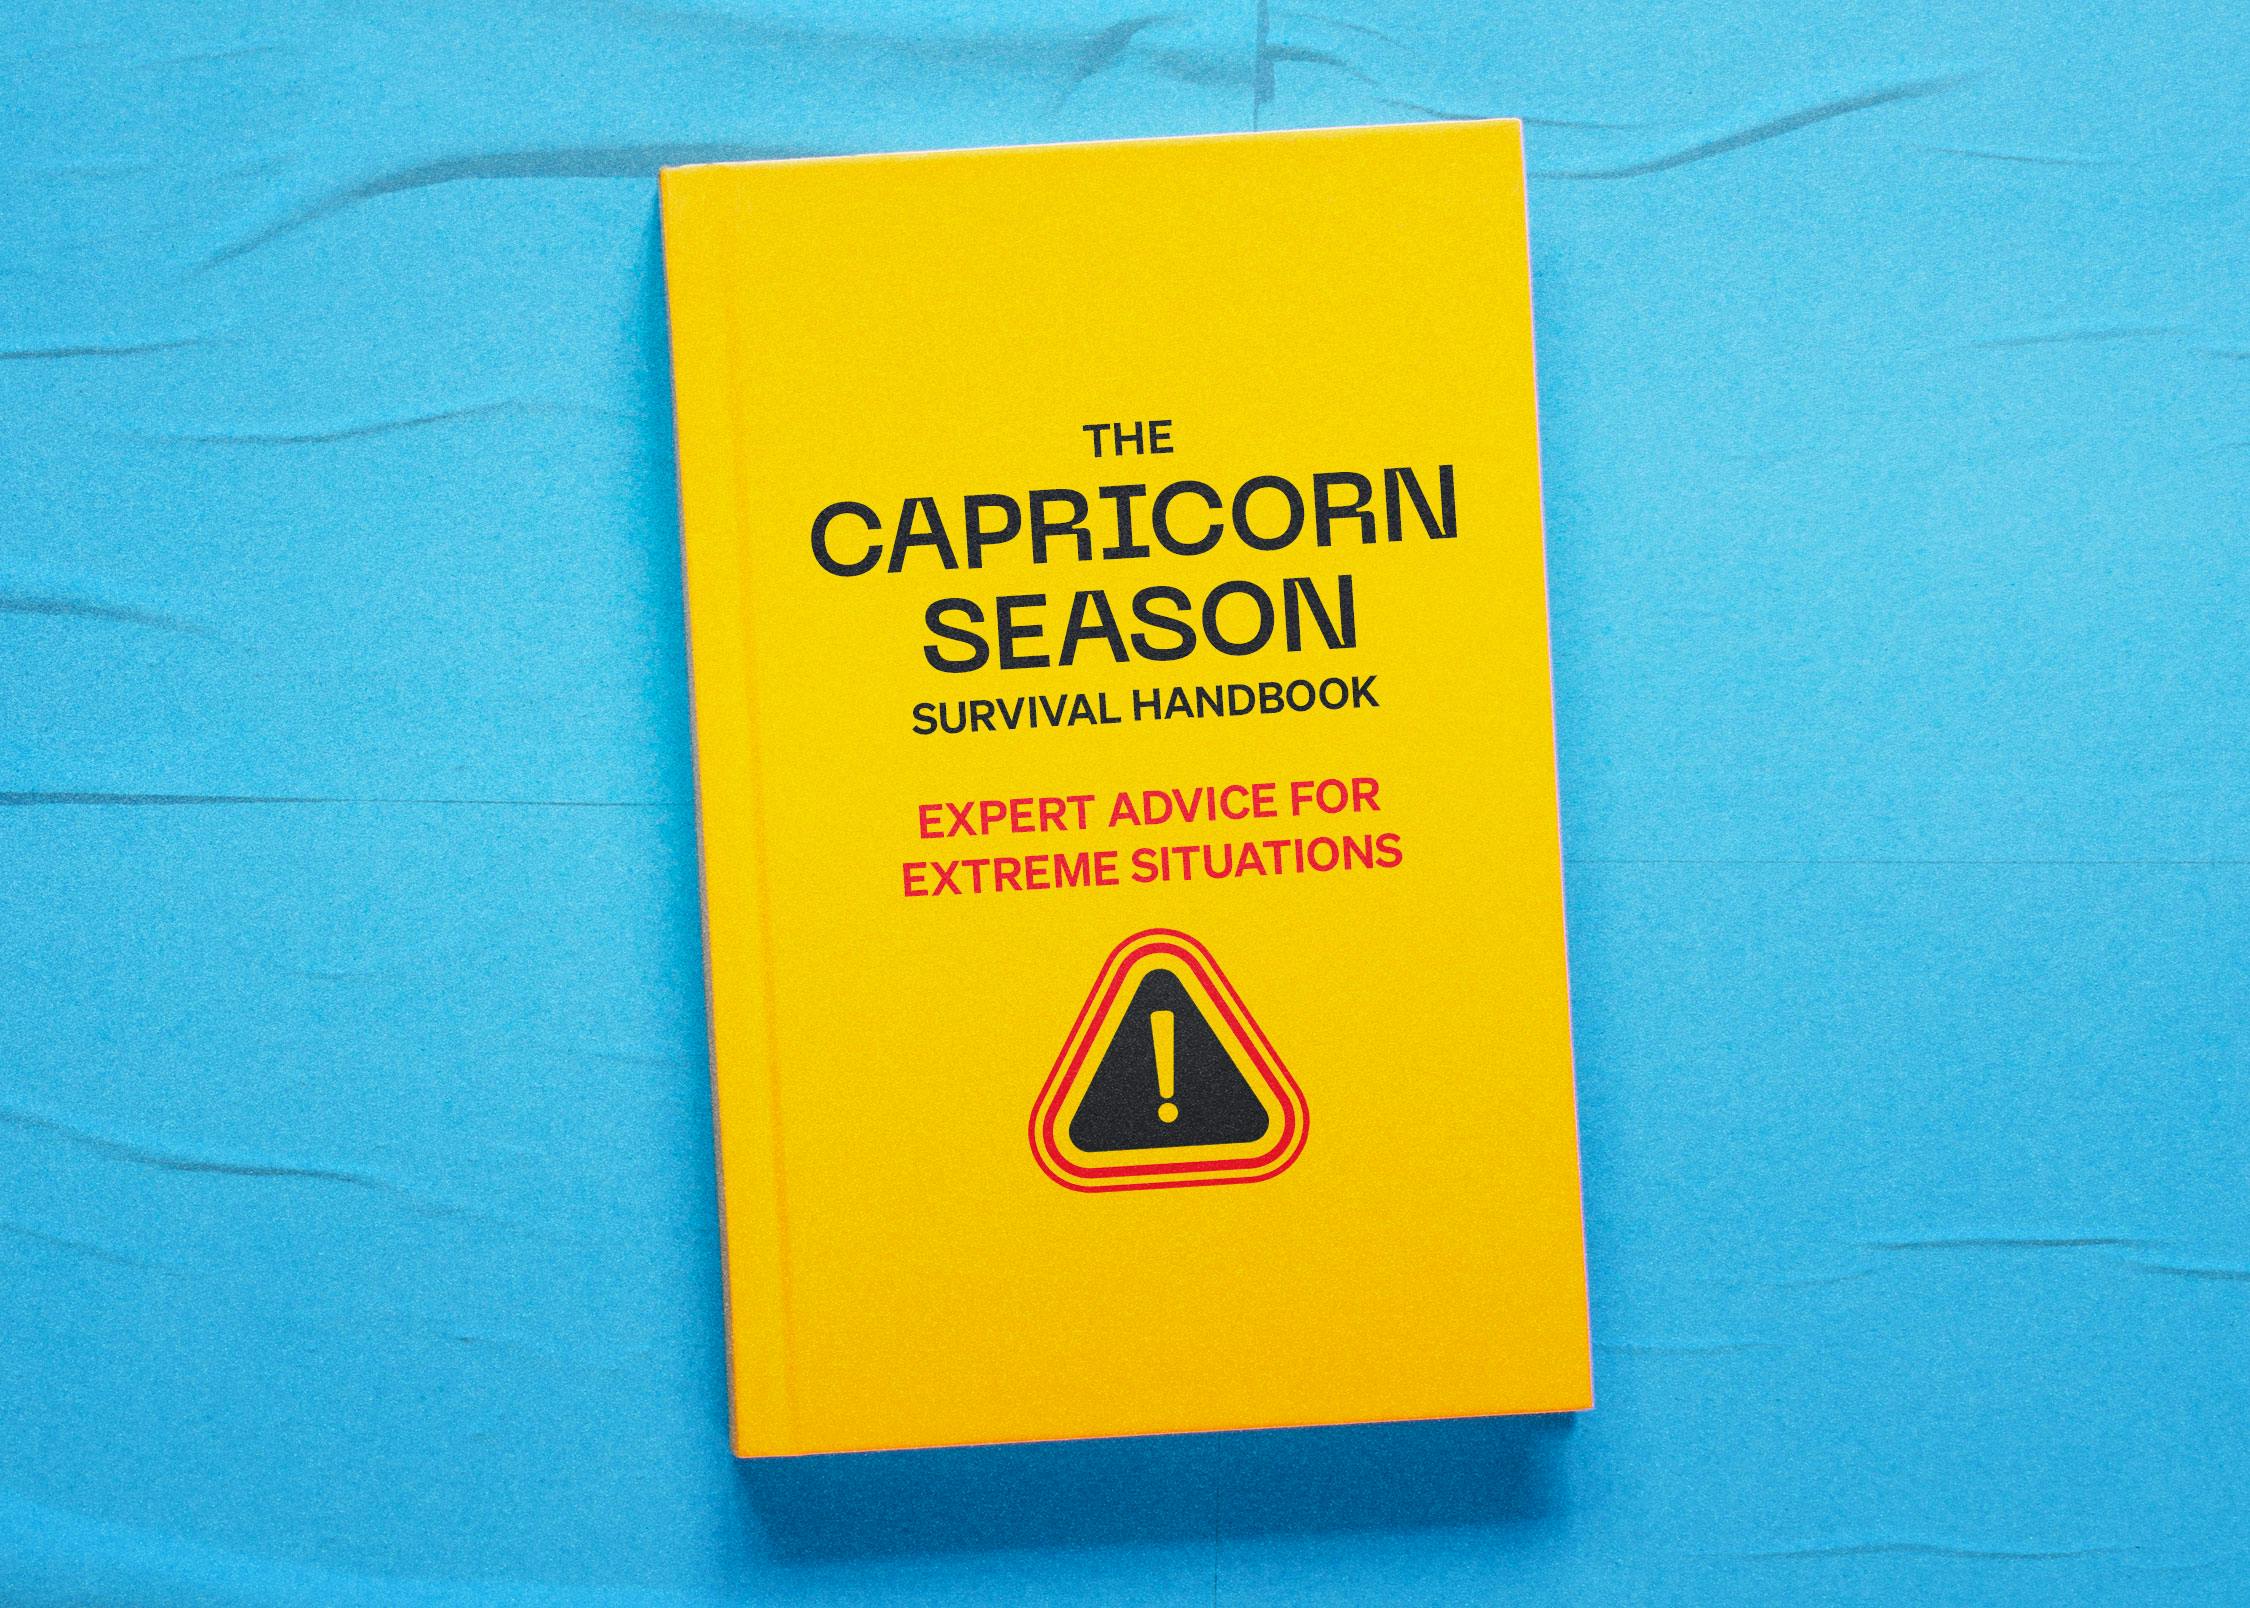 A yellow book titled "The Capricorn Season Survival Handbook Expert Advice for Extreme Situations" lies on a bright blue background.